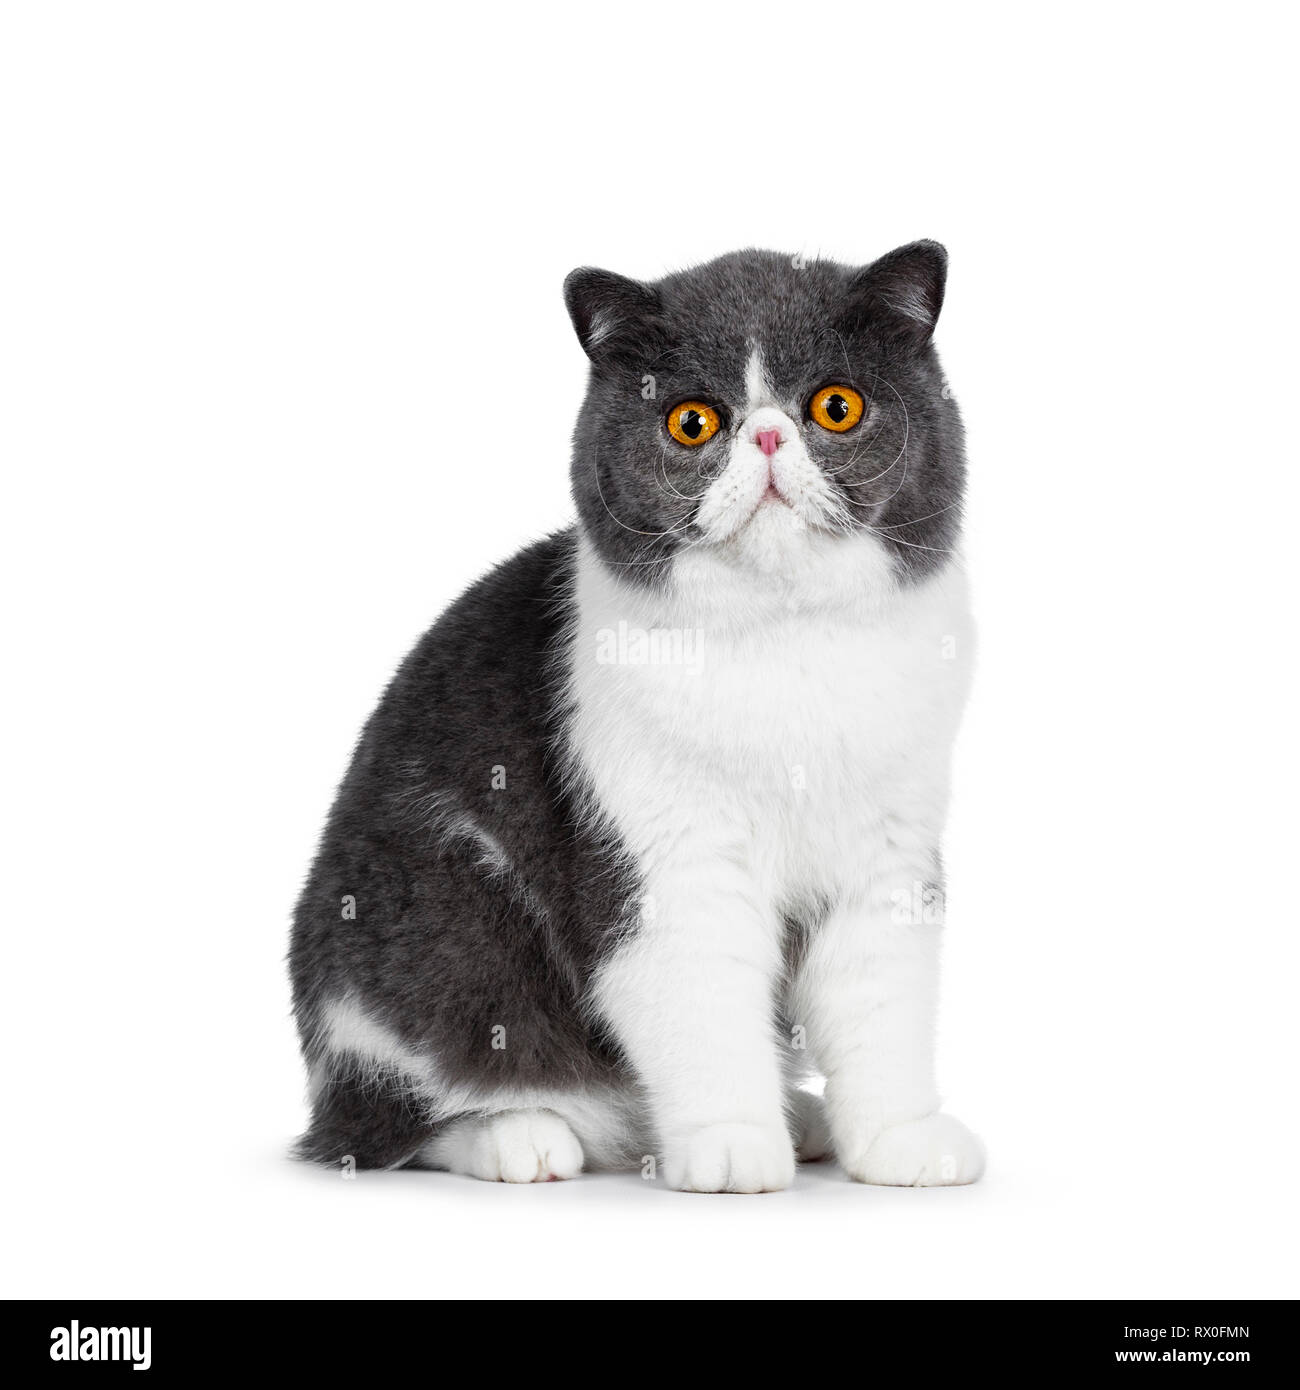 Cute blue with white young Exotic Shorthair cat, sitting side ways. Looking straight into lens with amazing round orange eyes. Isolated on white backg Stock Photo